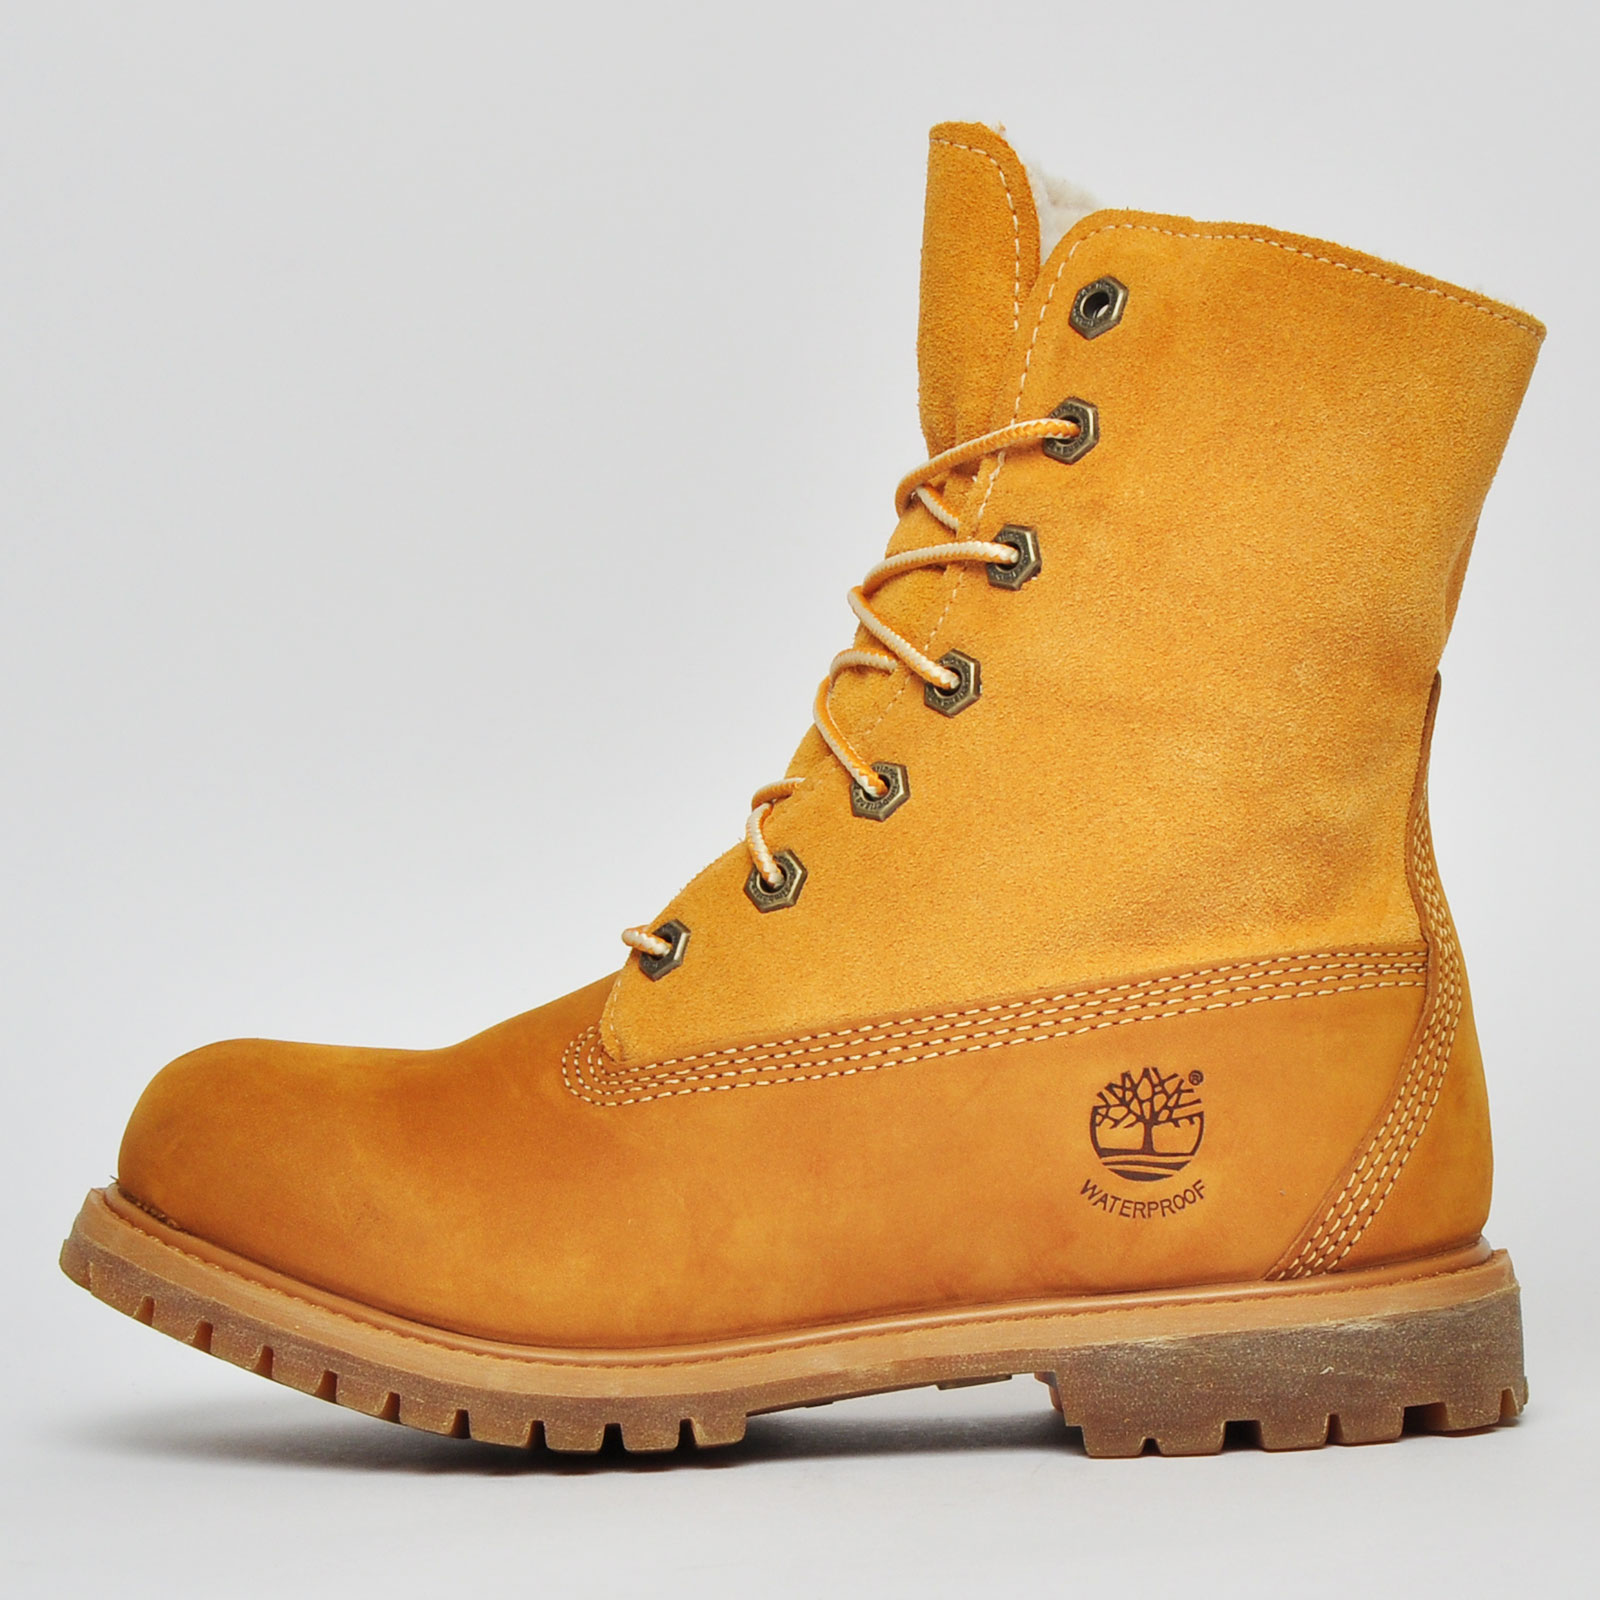 timberland teddy boots